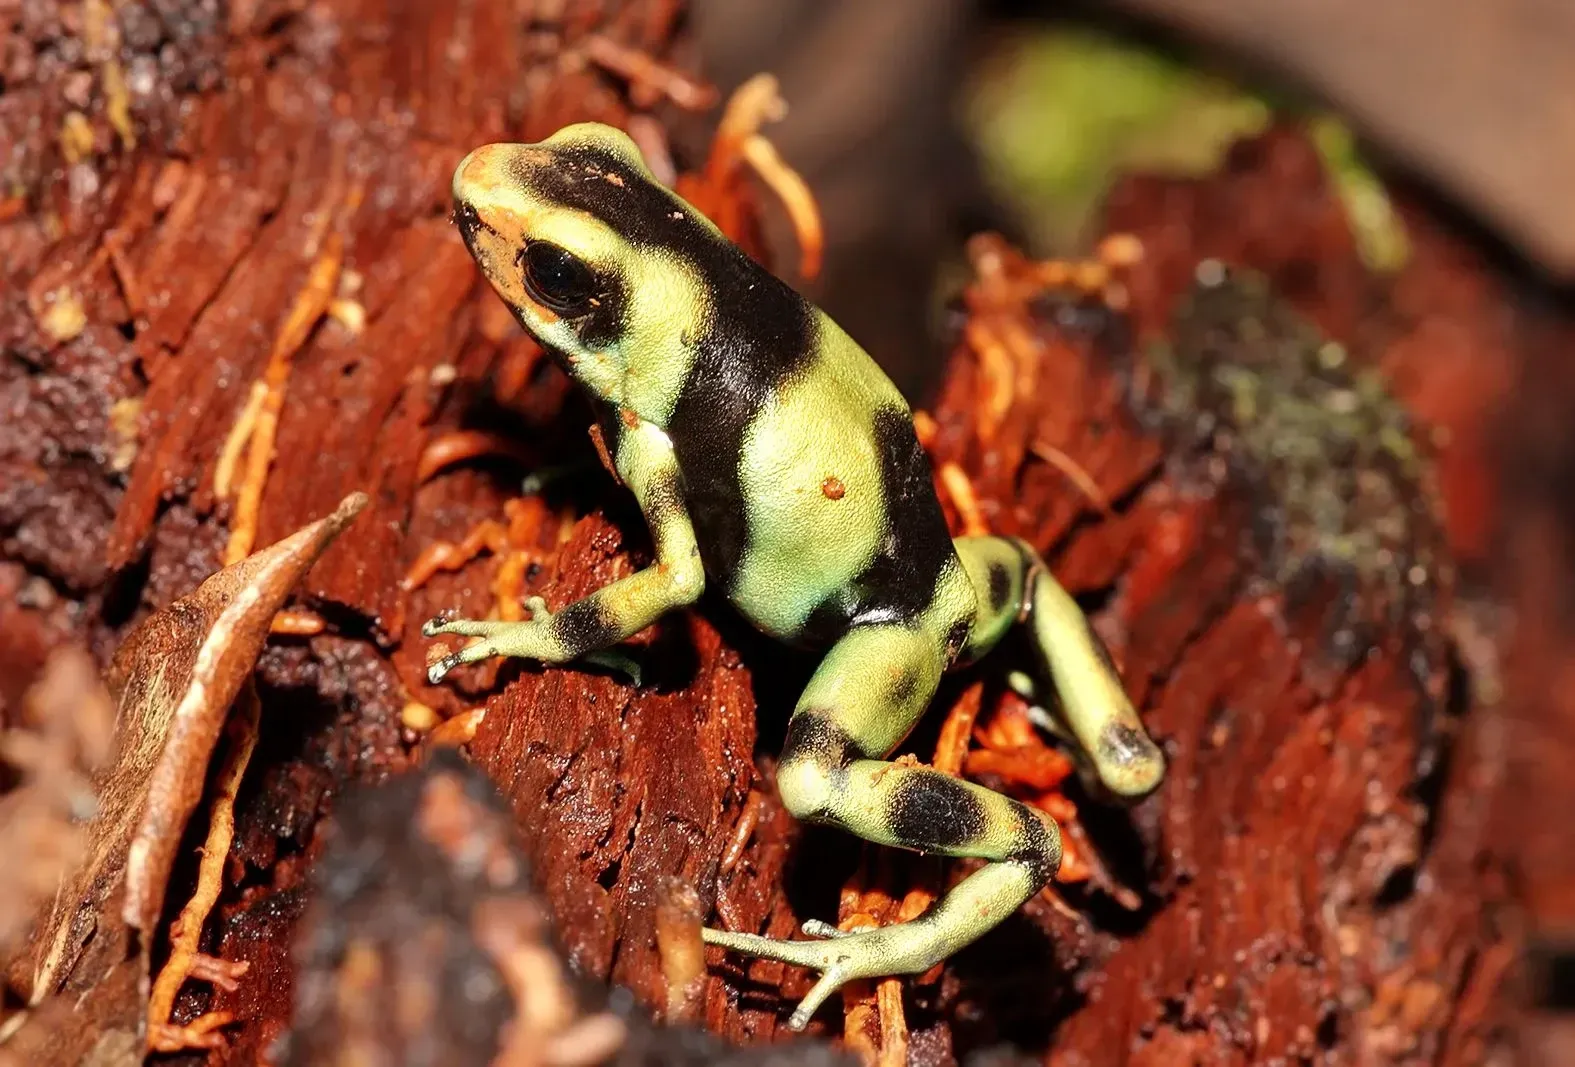 The color of the green and black poison dart frogs can also range from blackish green to brown.